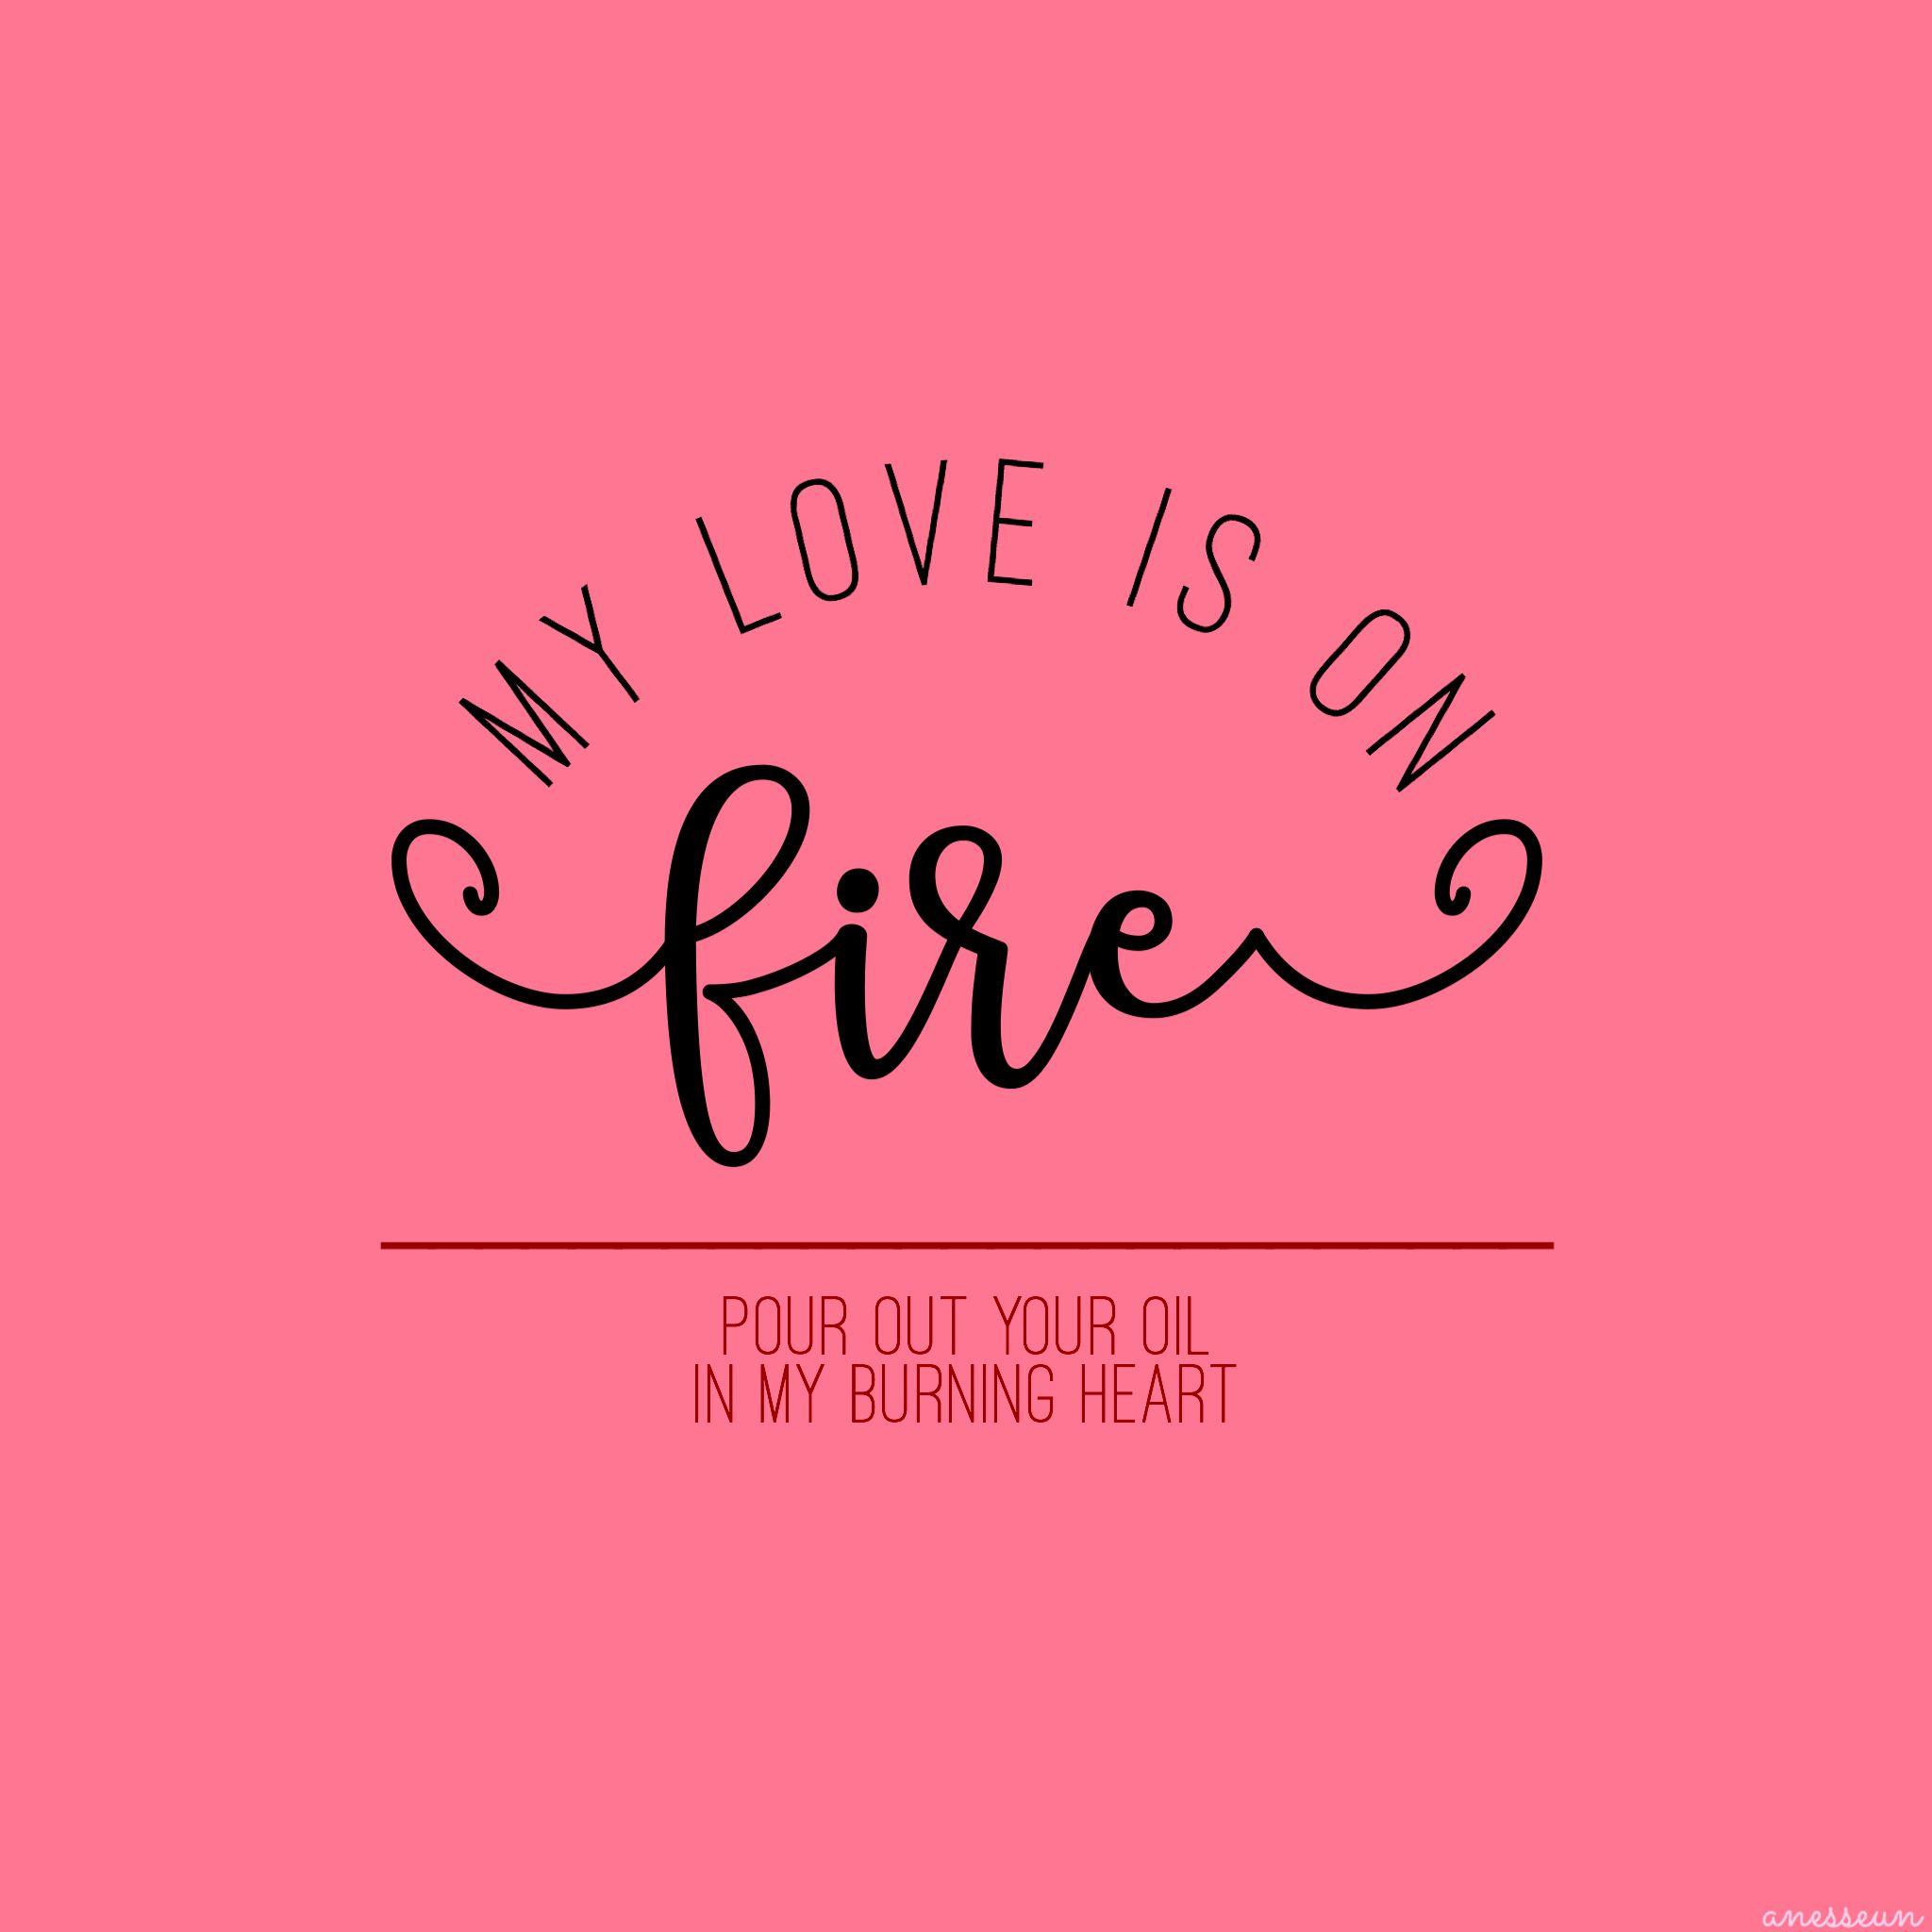 burn baby burn ! BLACKPINK With Fire lyrics are so quote